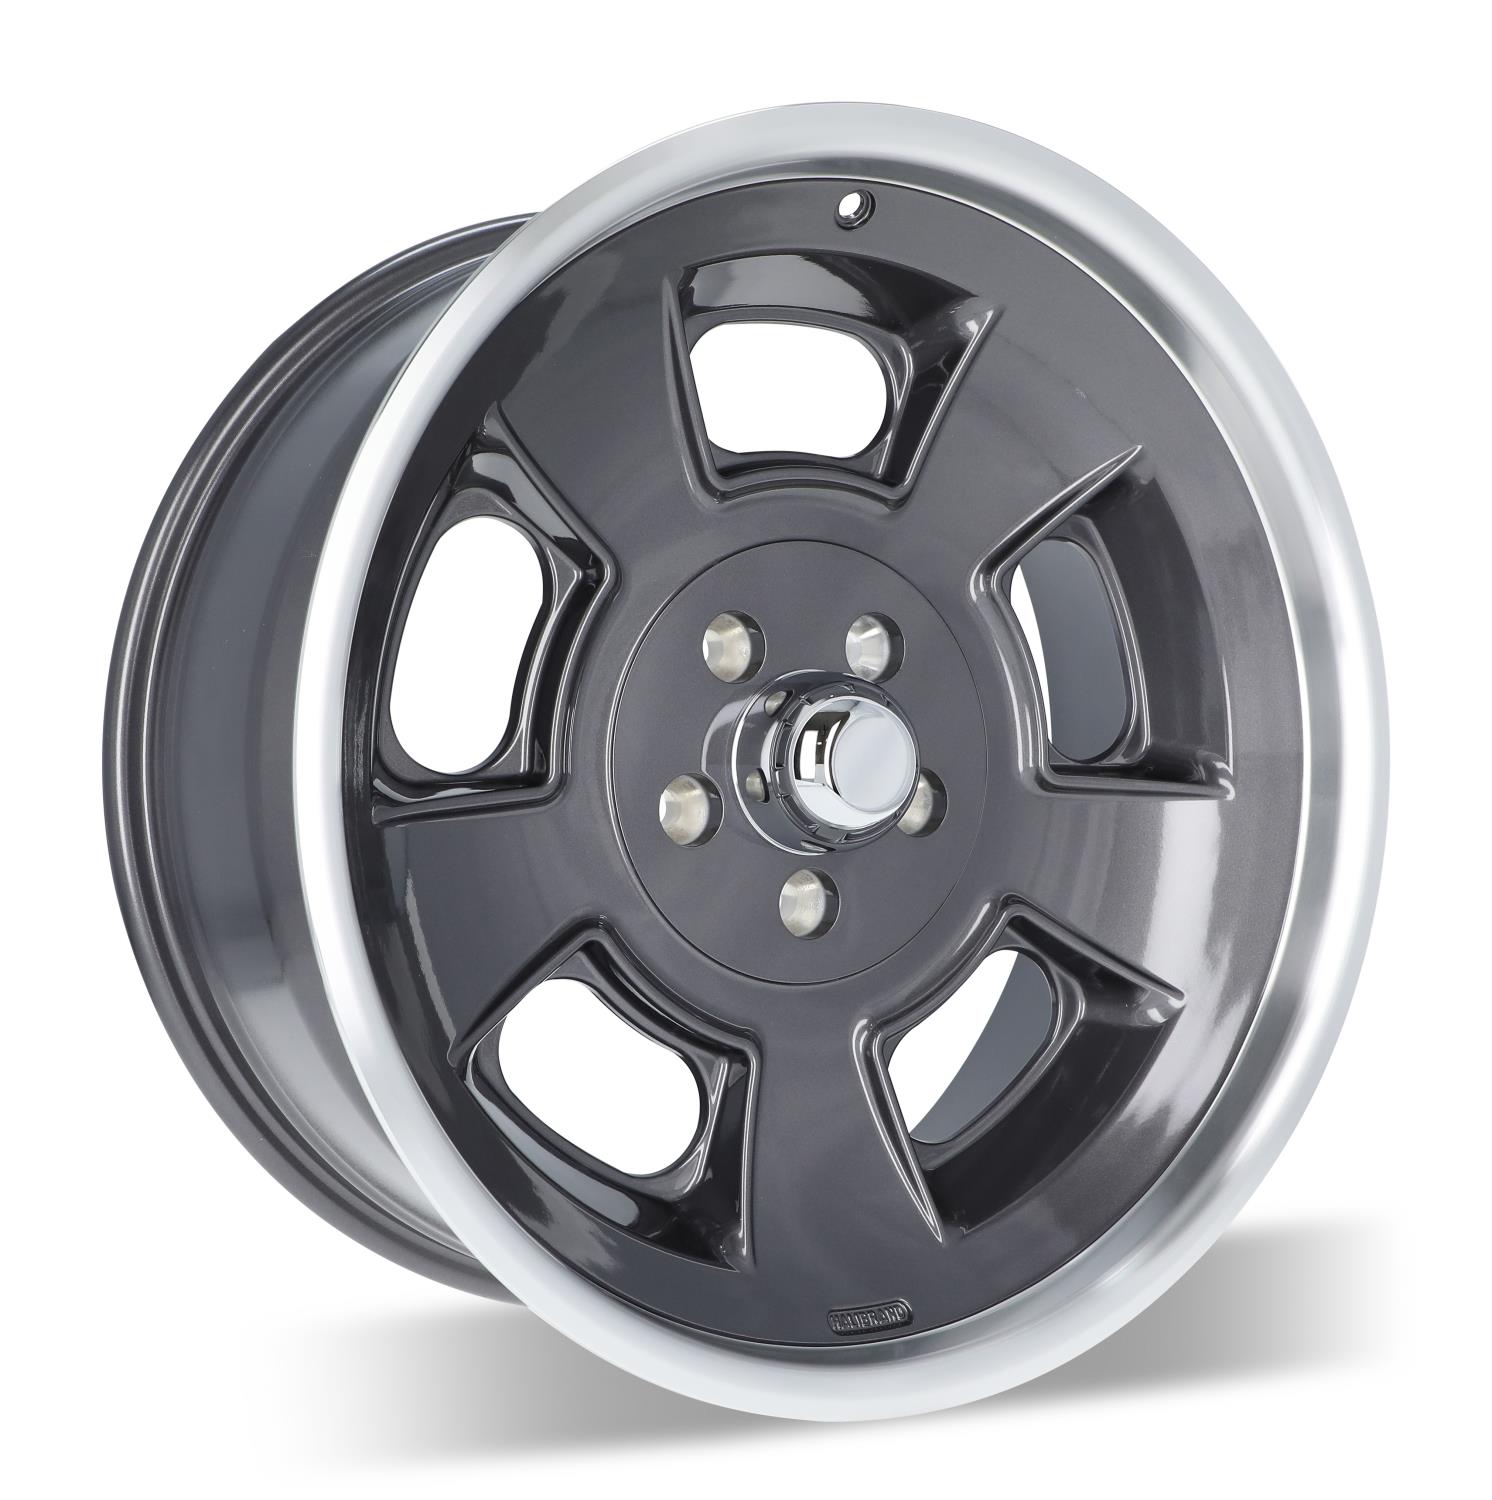 Sprint Front Wheel, Size: 20x8.5", Bolt Pattern: 5x5", Backspace: 4.5" [Anthracite with Machined Lip - Gloss Clearcoat]